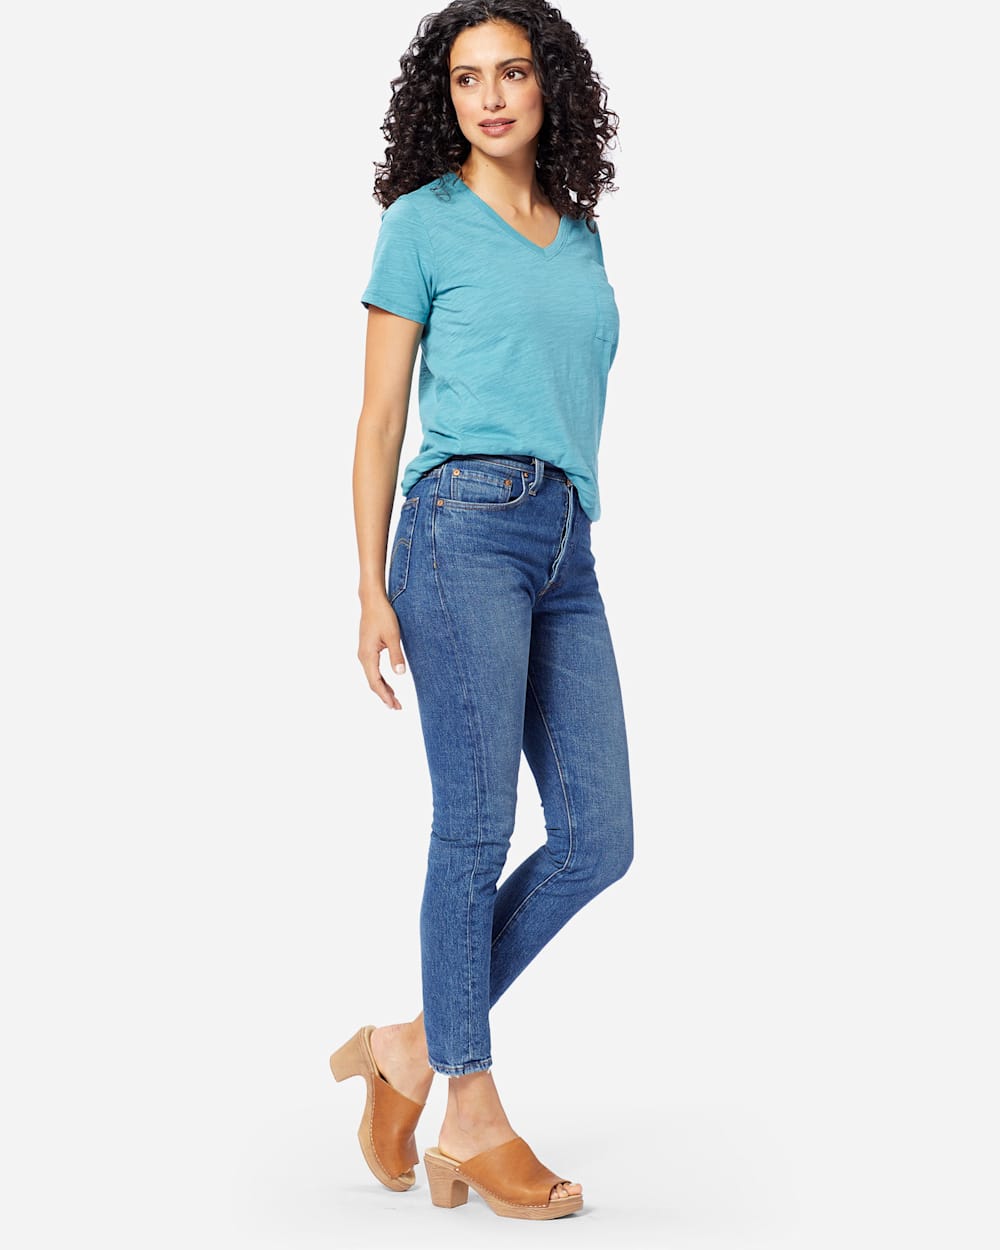 ADDITIONAL VIEW OF LEVI'S 501 SKINNY WE THE PEOPLE JEANS IN MEDIUM BLUE image number 2